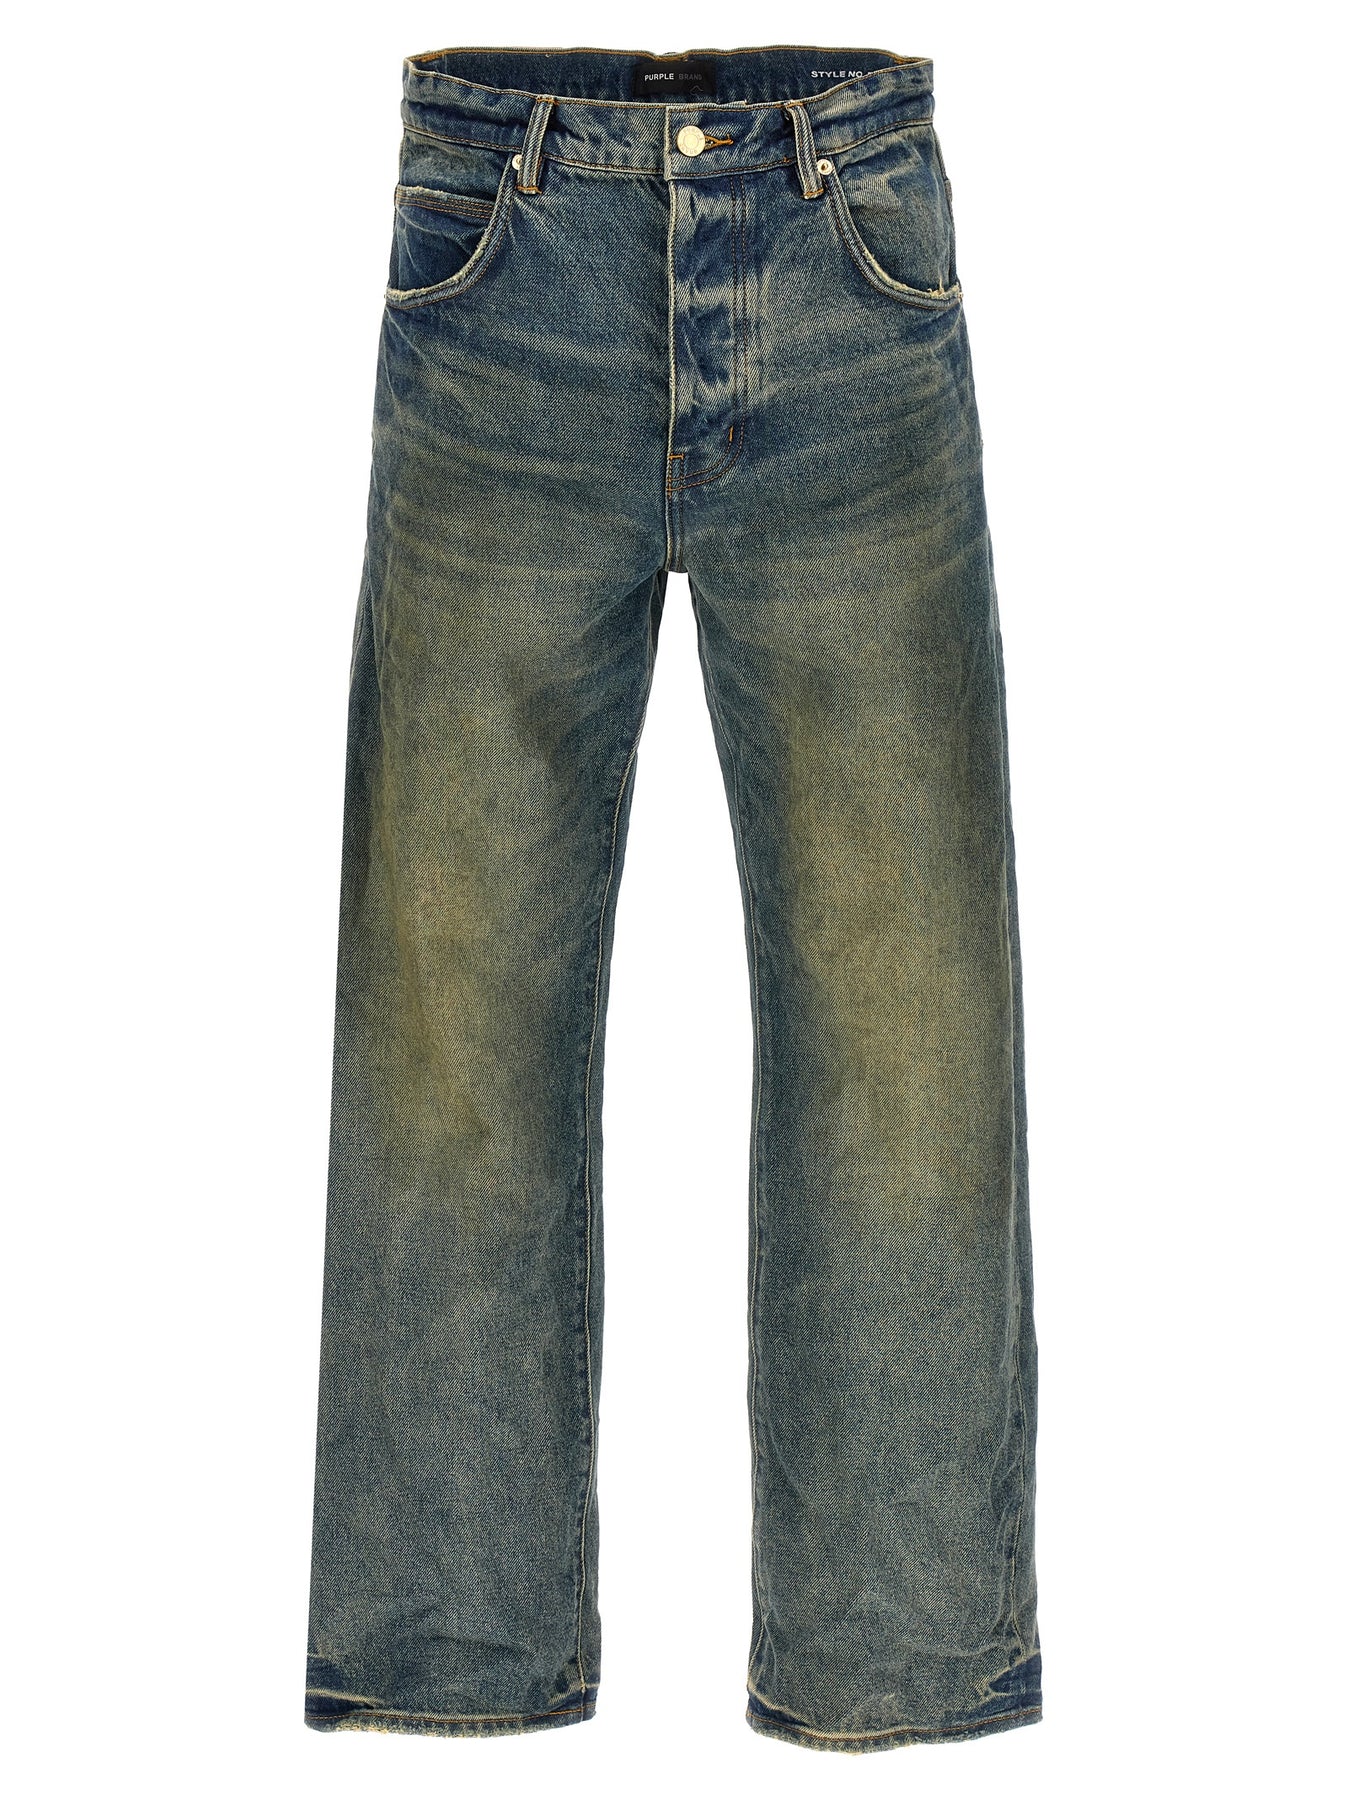 PURPLE RELAXED VINTAGE DIRTY JEANS BLUE